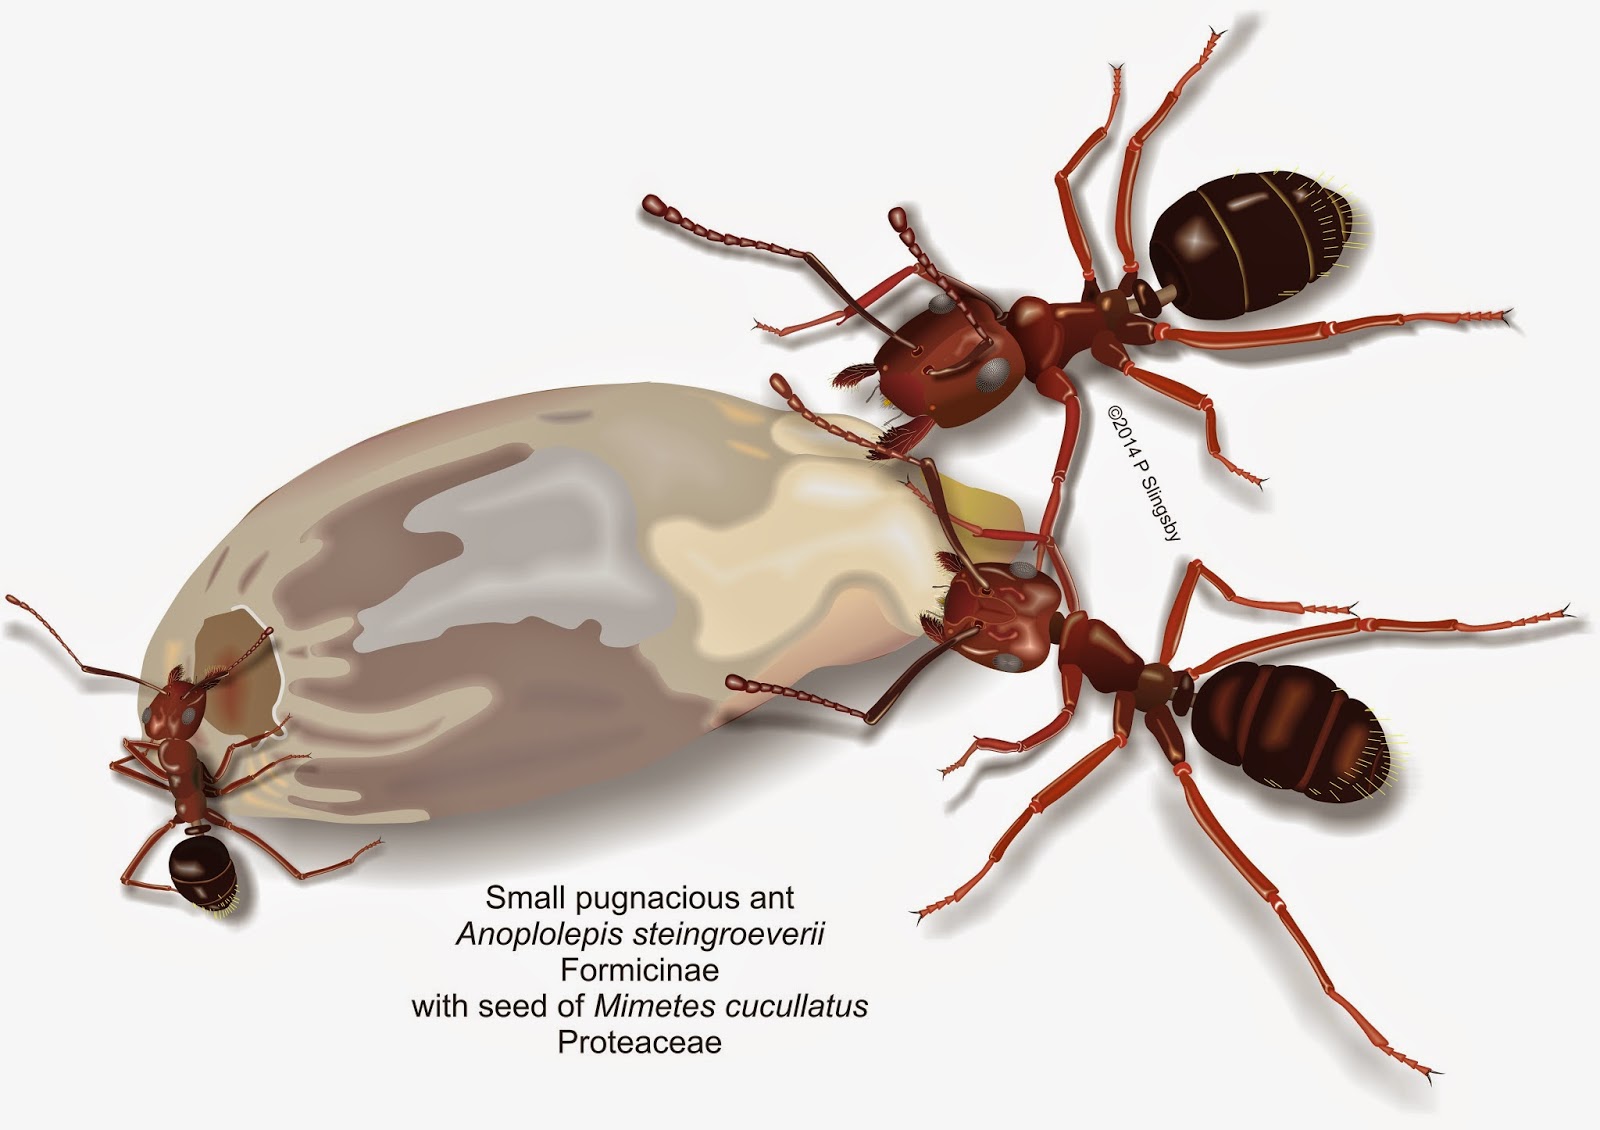 why do king and queen termites mate for life but queen ants kill the king after mating